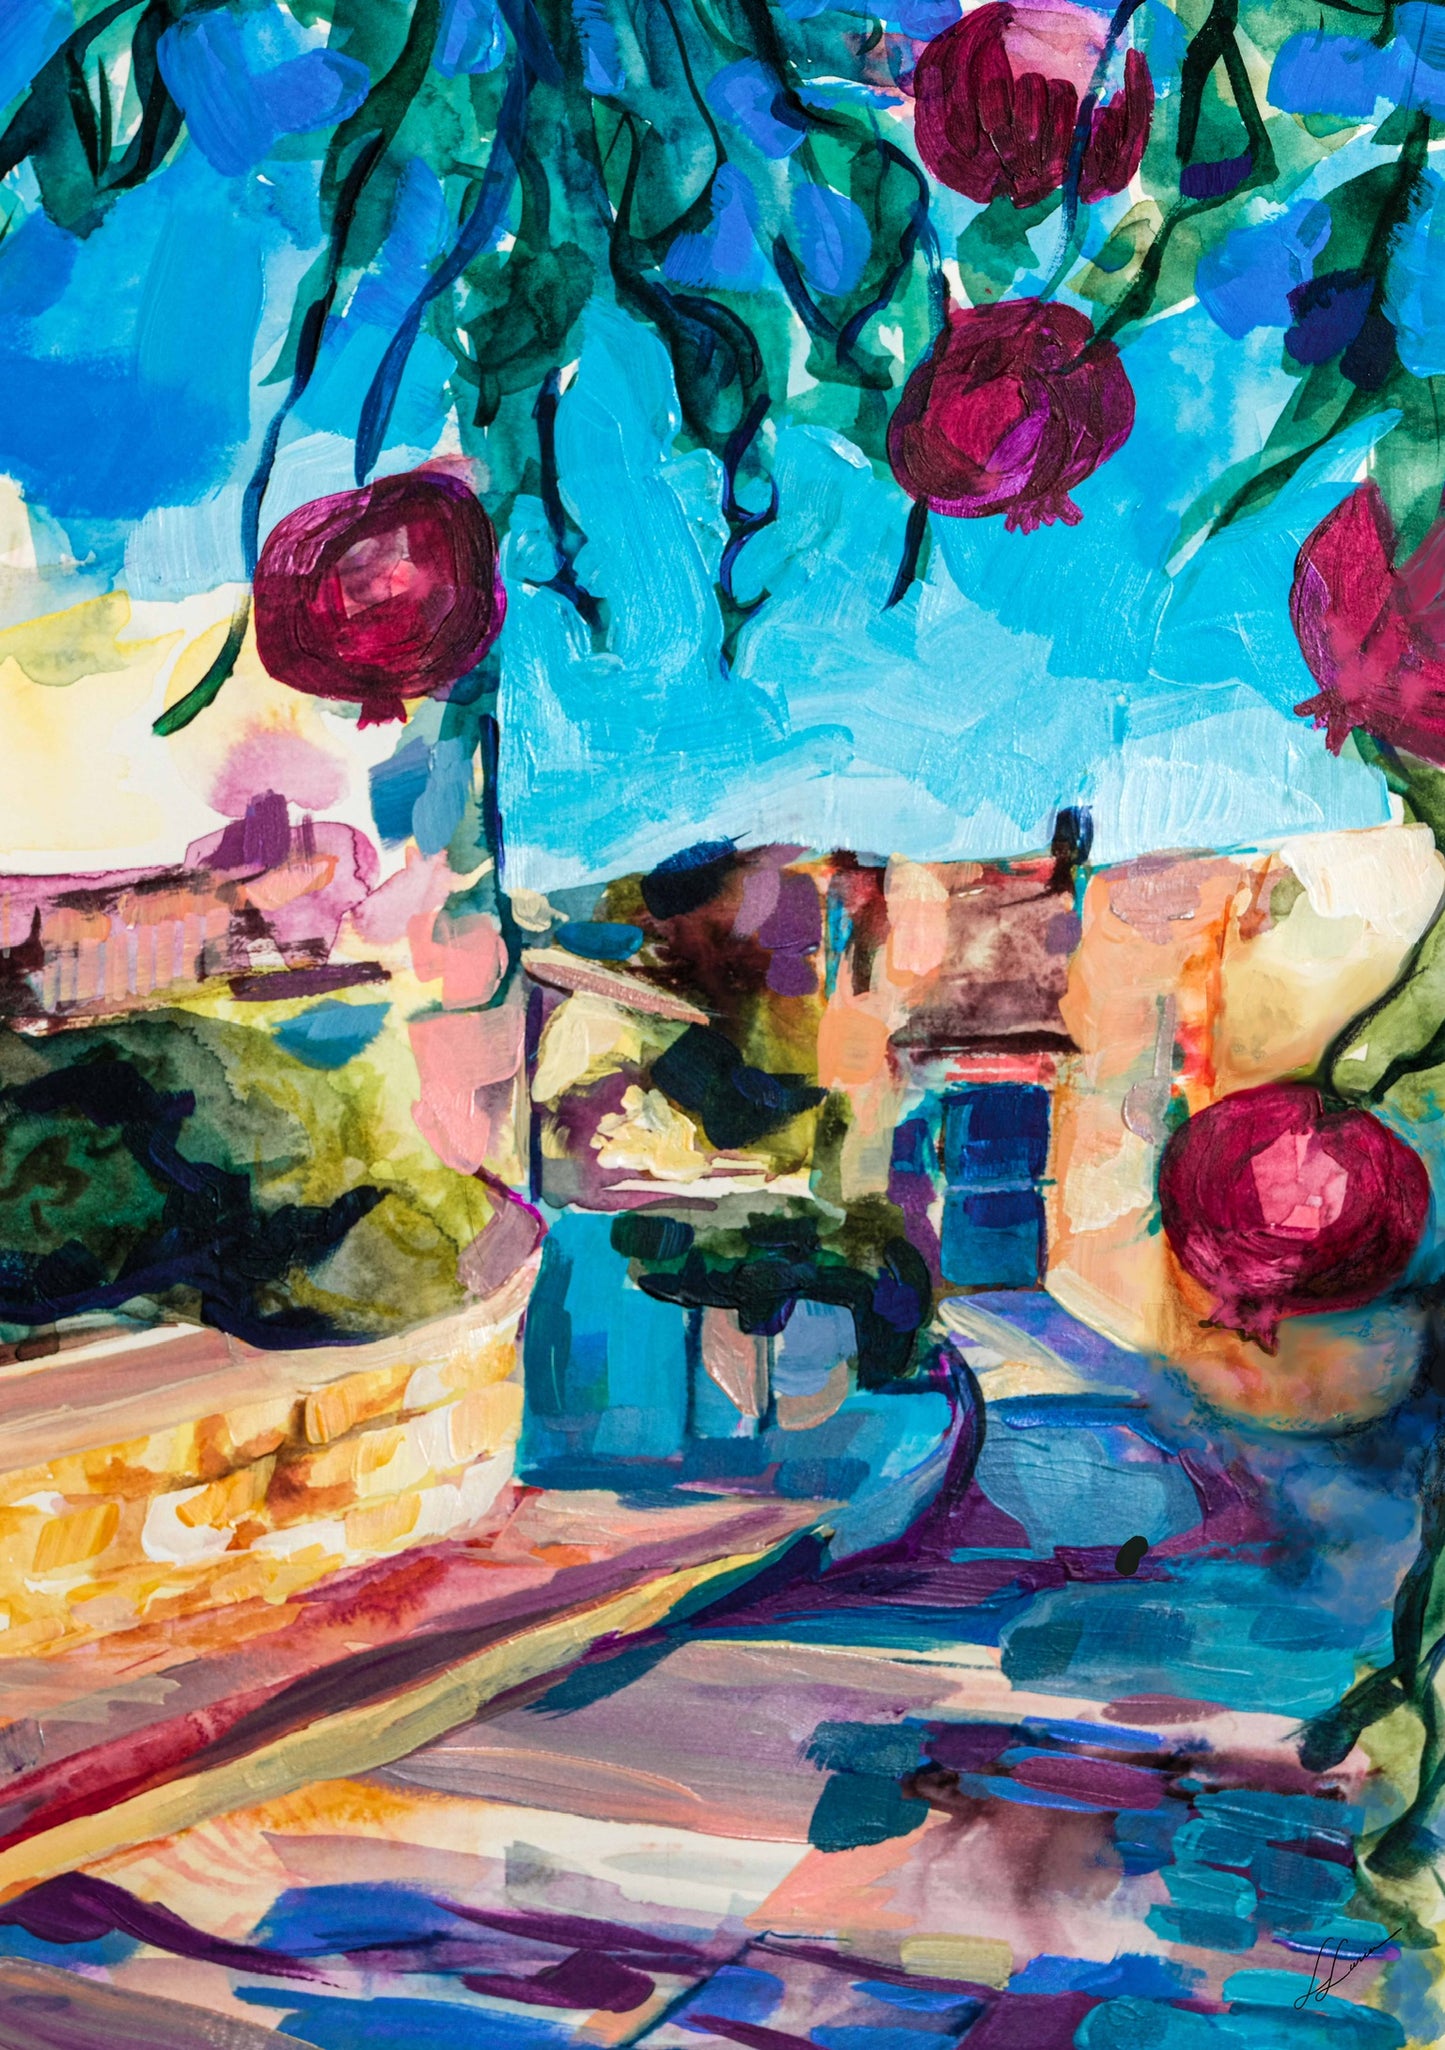 Dancing Shadows of Tzfat Watercolor by Leah Luria Print on Fine Art Paper or Canvas Giclée